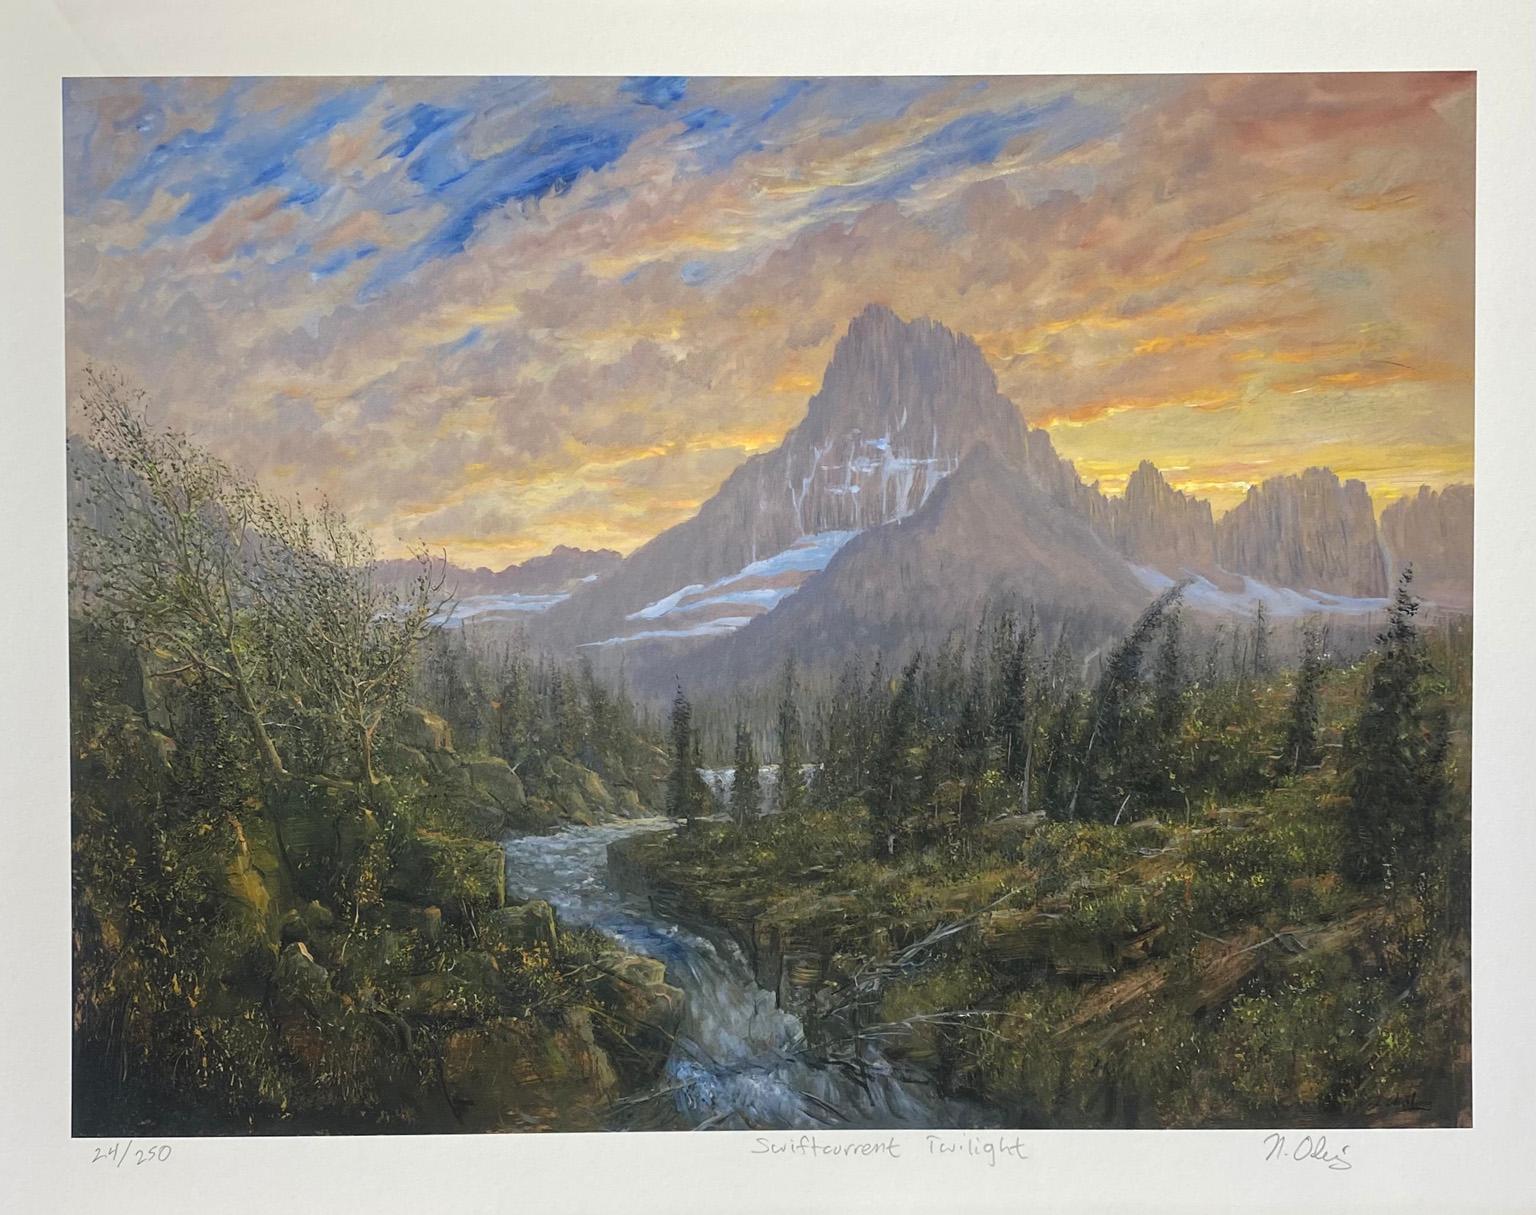 Nicholas Oberling Landscape Painting - Giclee of Swiftcurrent Twilight at Many Glacier in Glacier National Park Montana